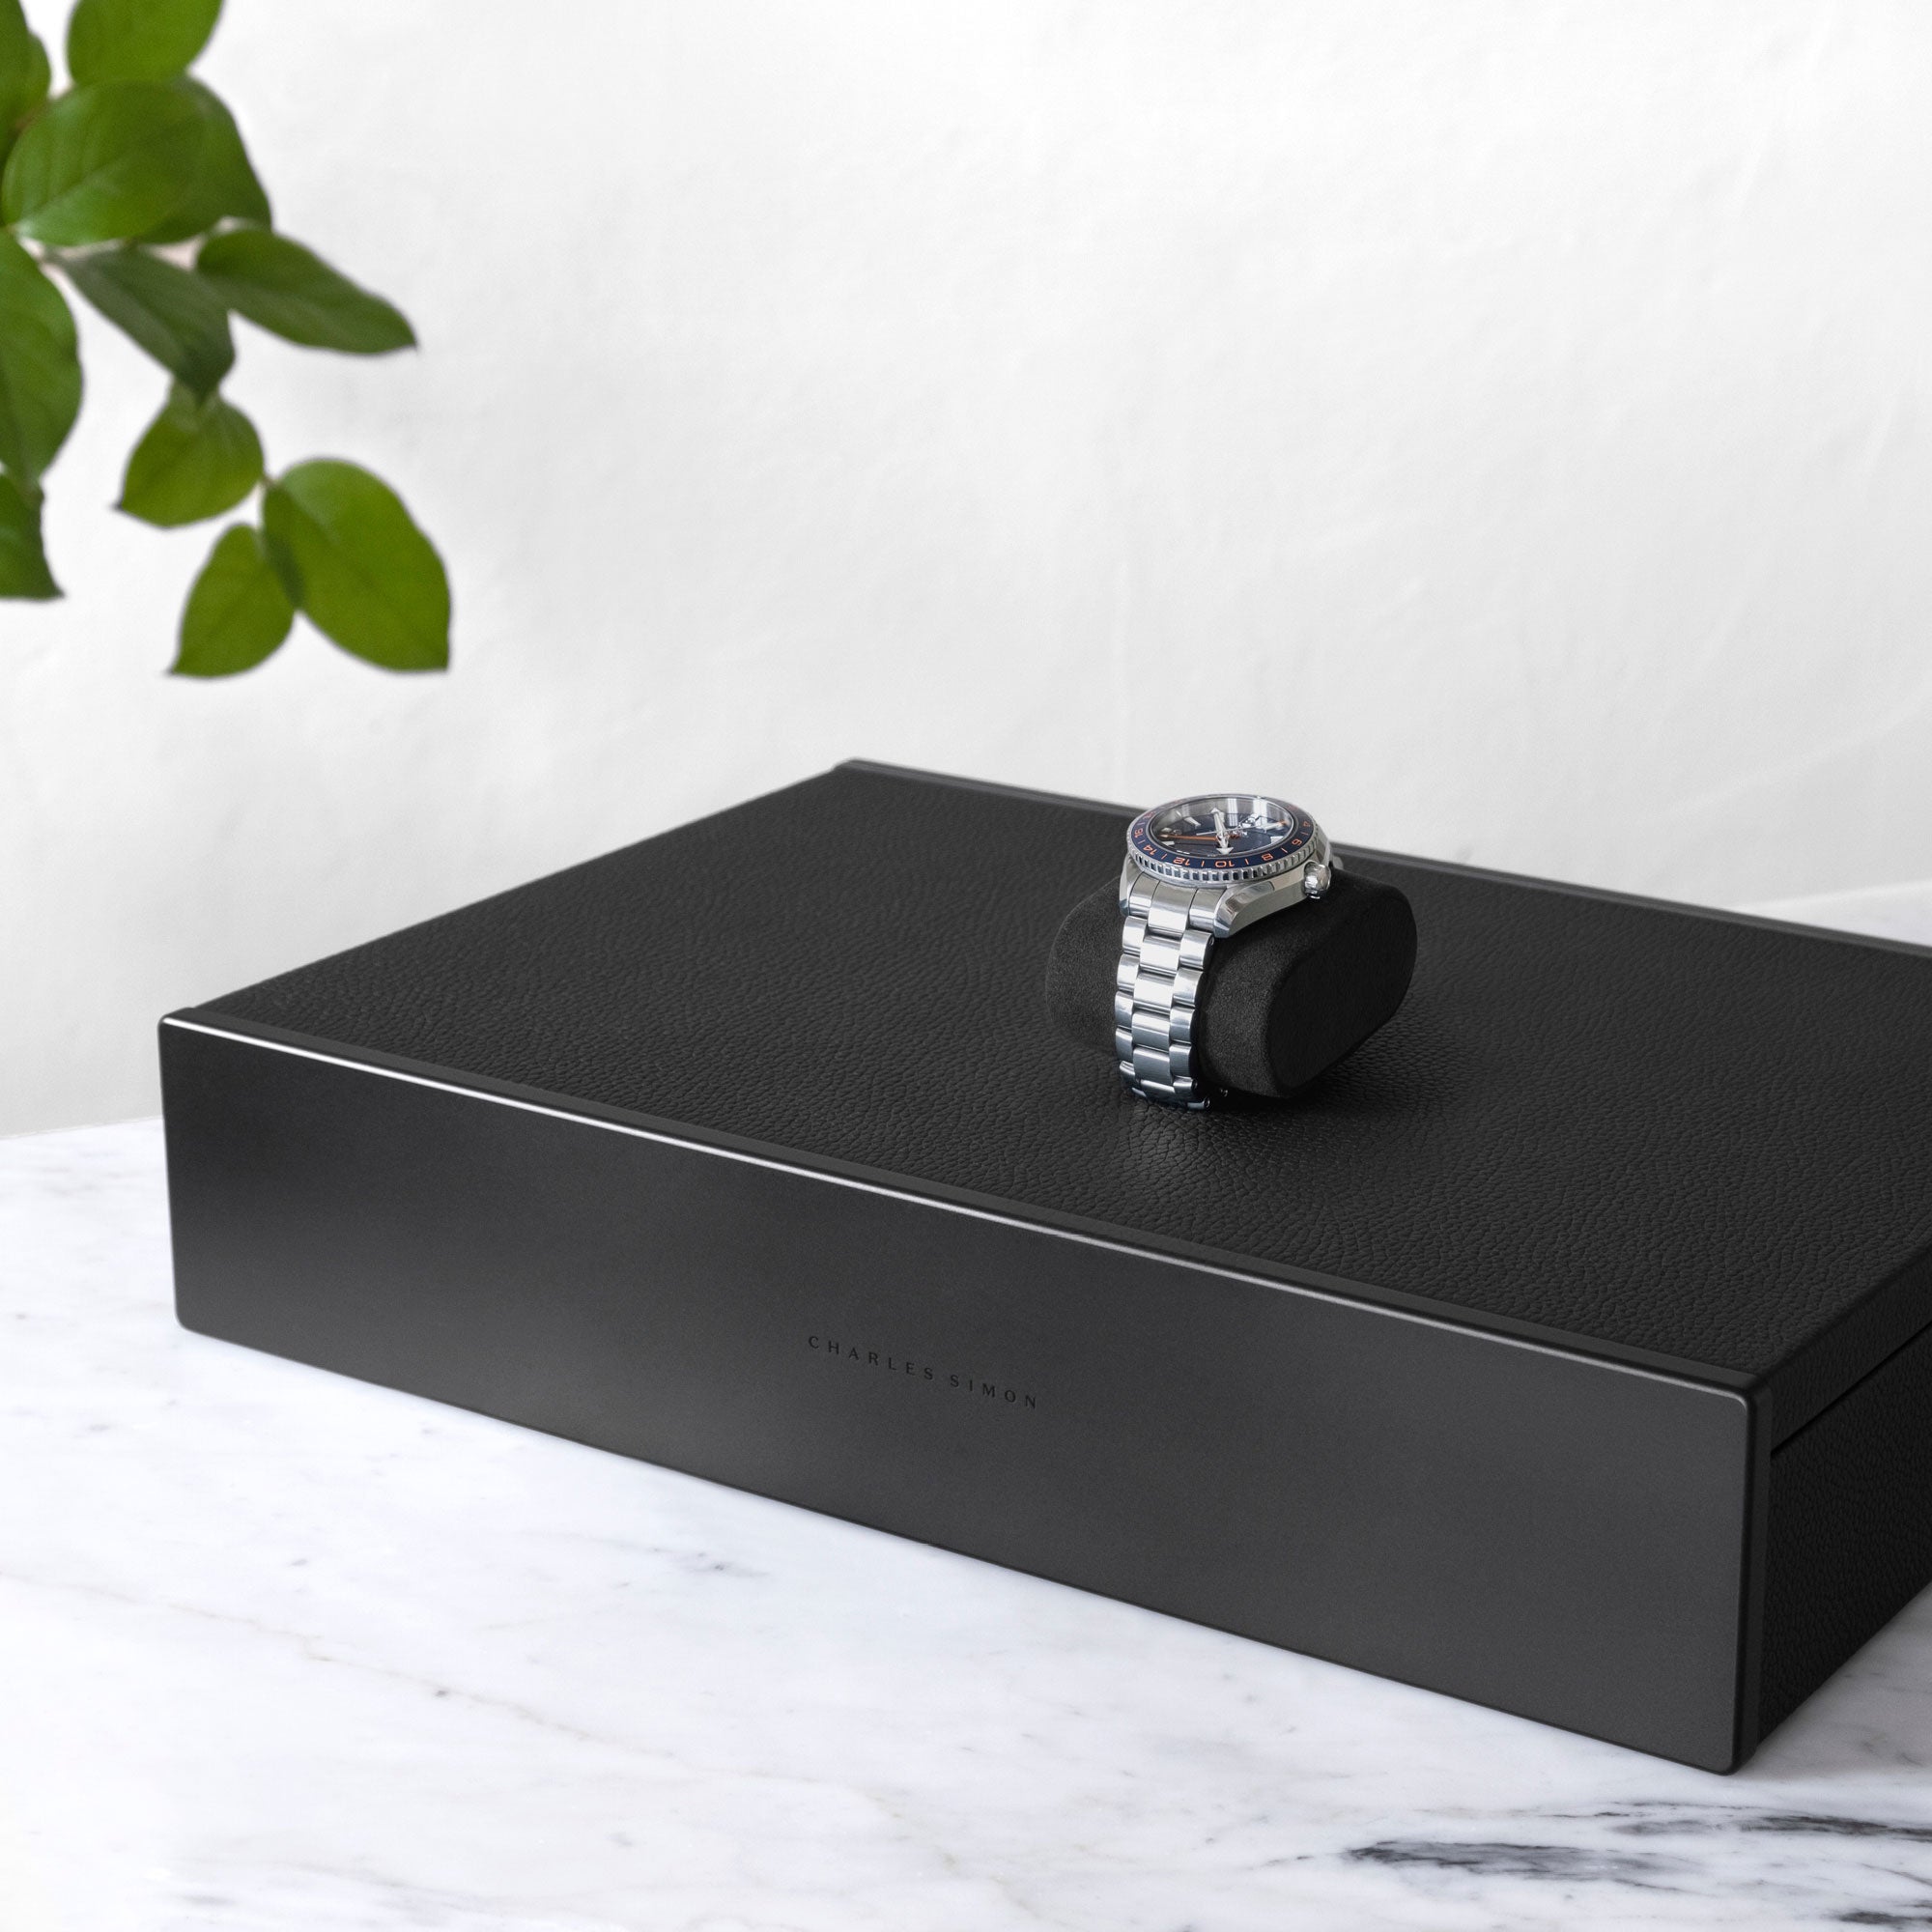 Closed Spence Watch box in black leather and black anodized aluminum and carbon fiber casing with luxury watch displayed on top of it. 